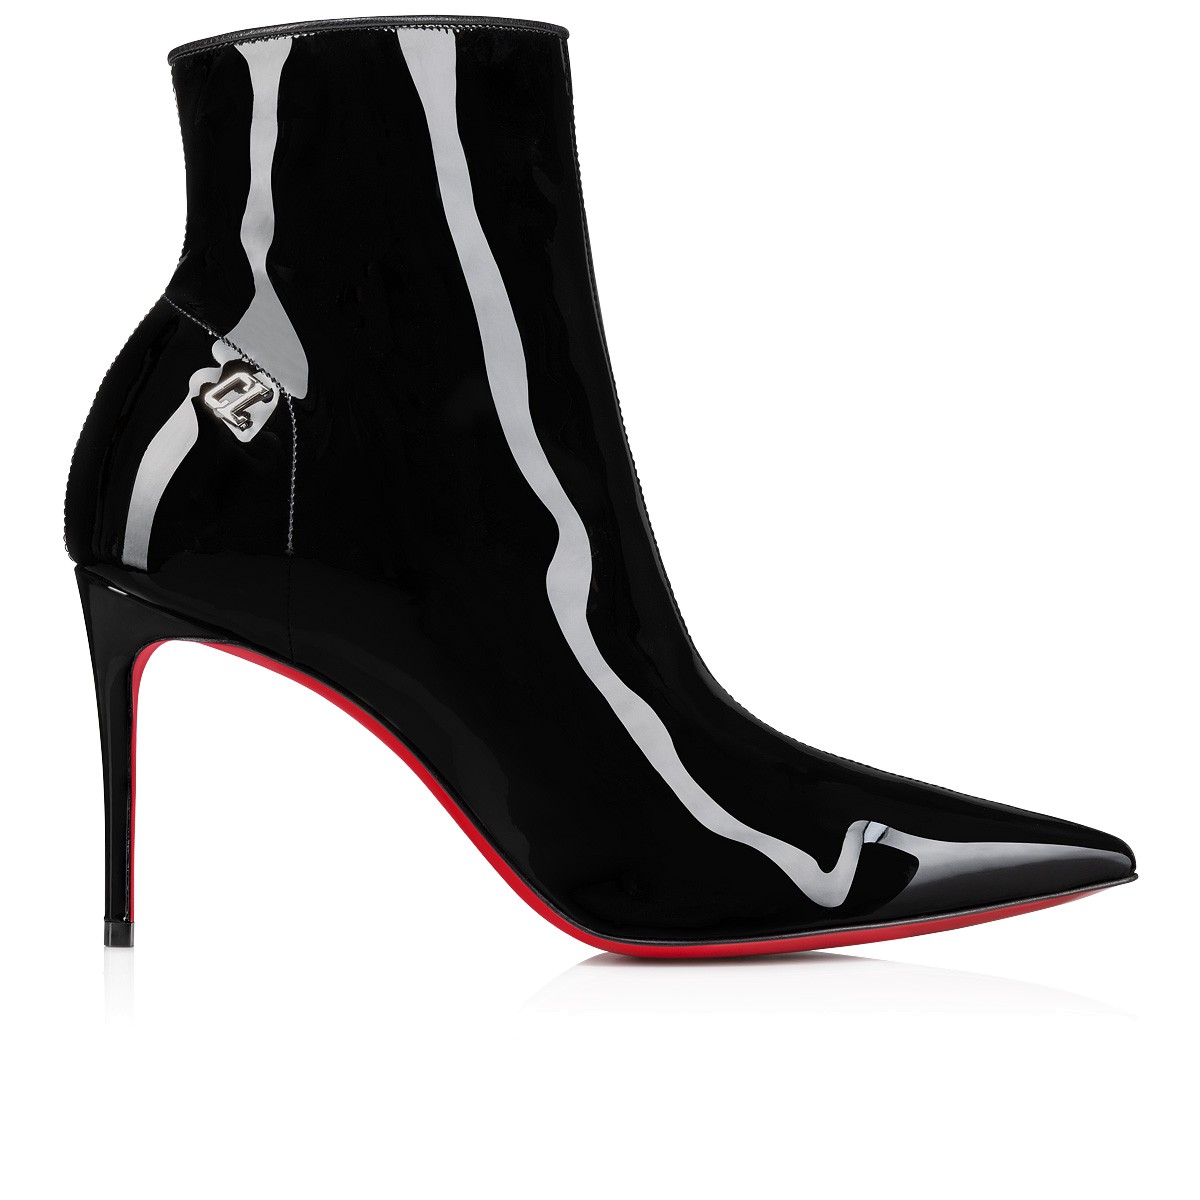 Sporty Kate Booty 85 Black Soft patent calf leather - Women Shoes -  Christian Louboutin